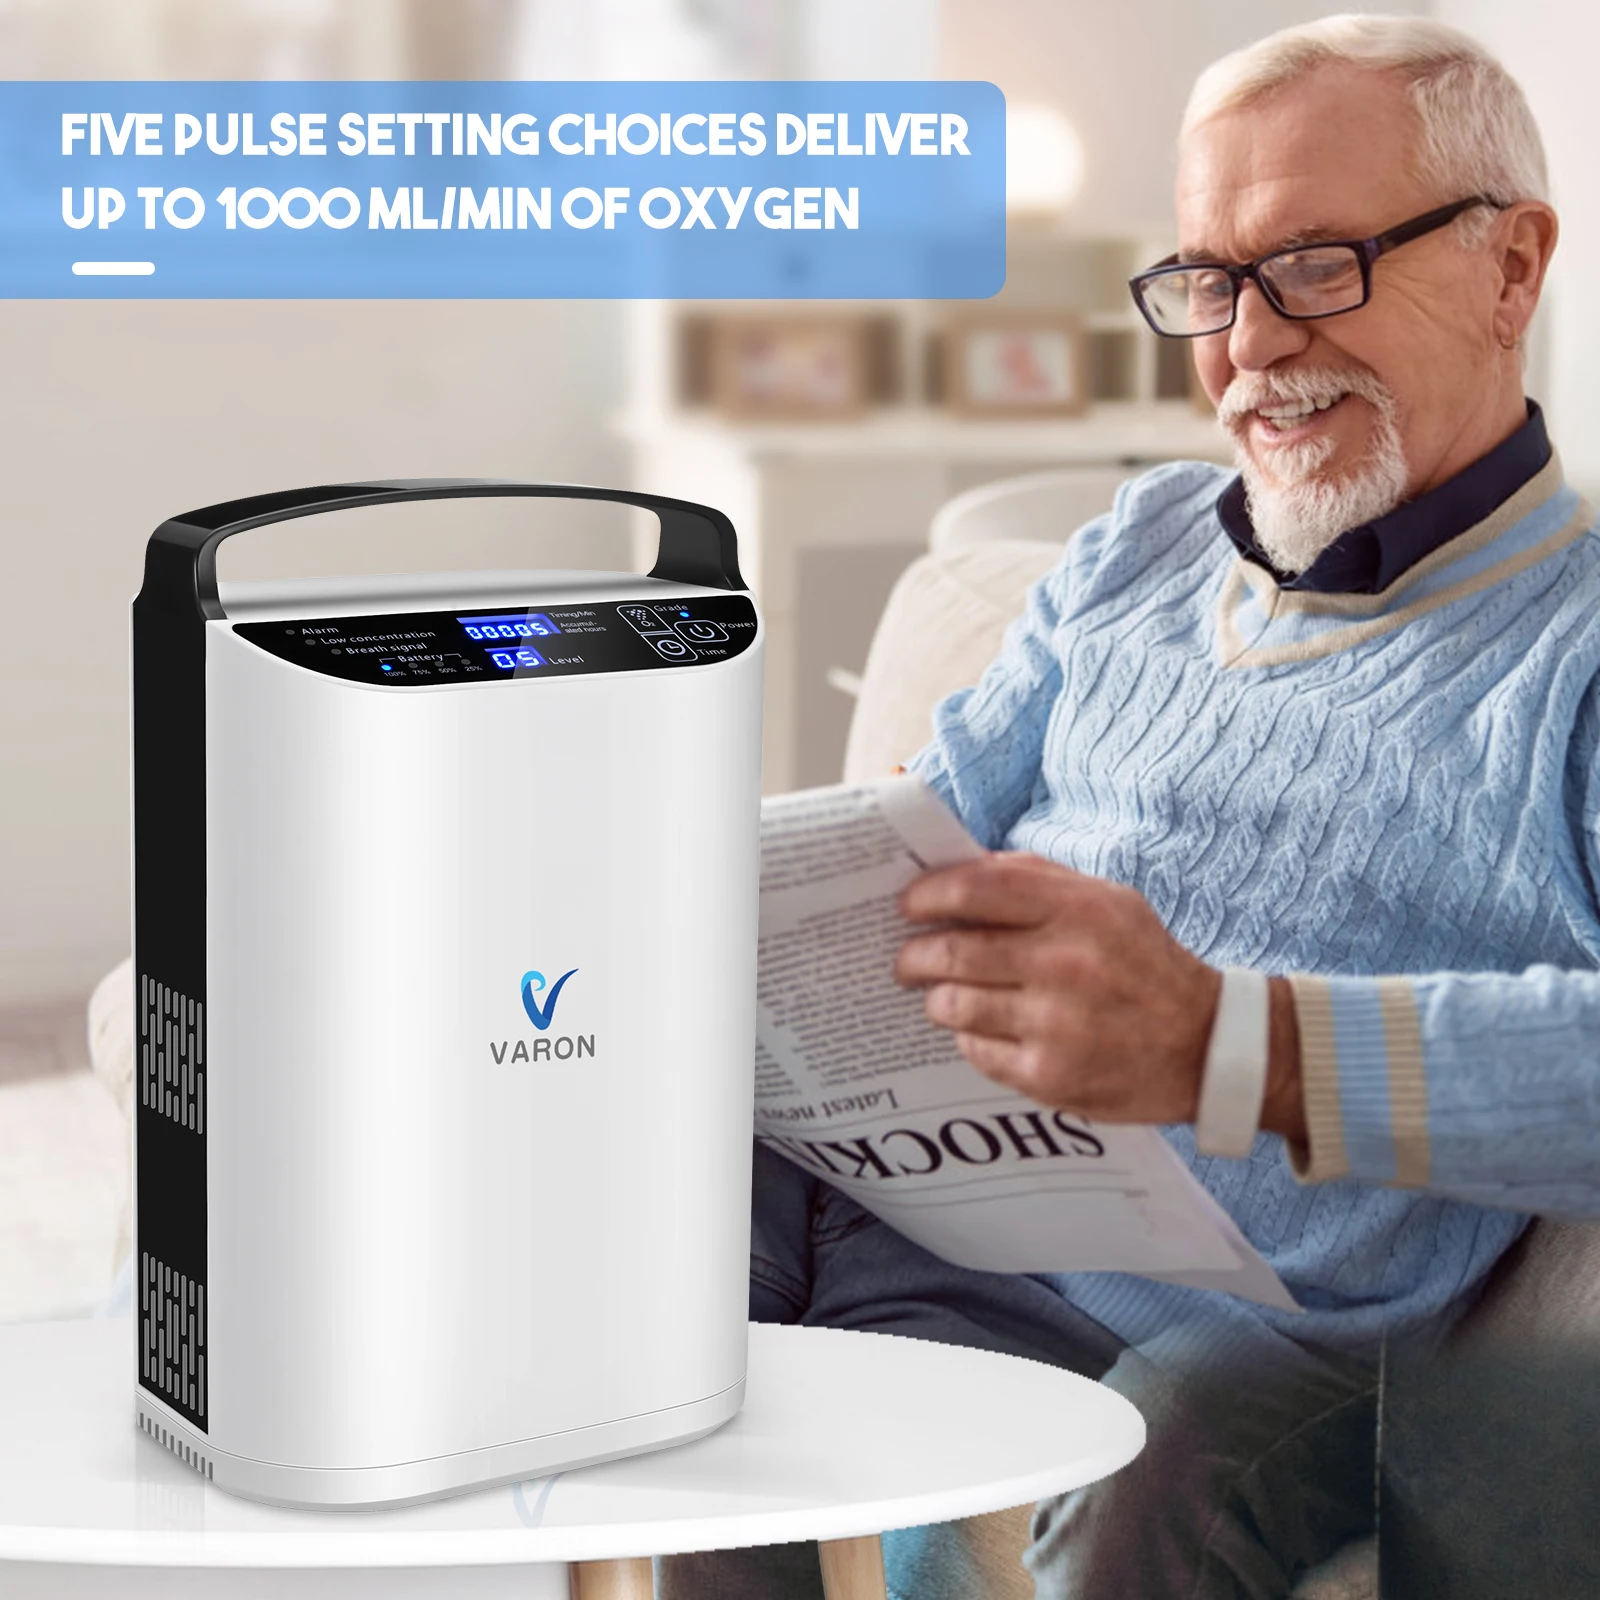 

VARON Pulse Flow 5L Oxygent Concentrator Car Use 90% ± 3% free battery For Home oxygens generating Oxygene machine Portable